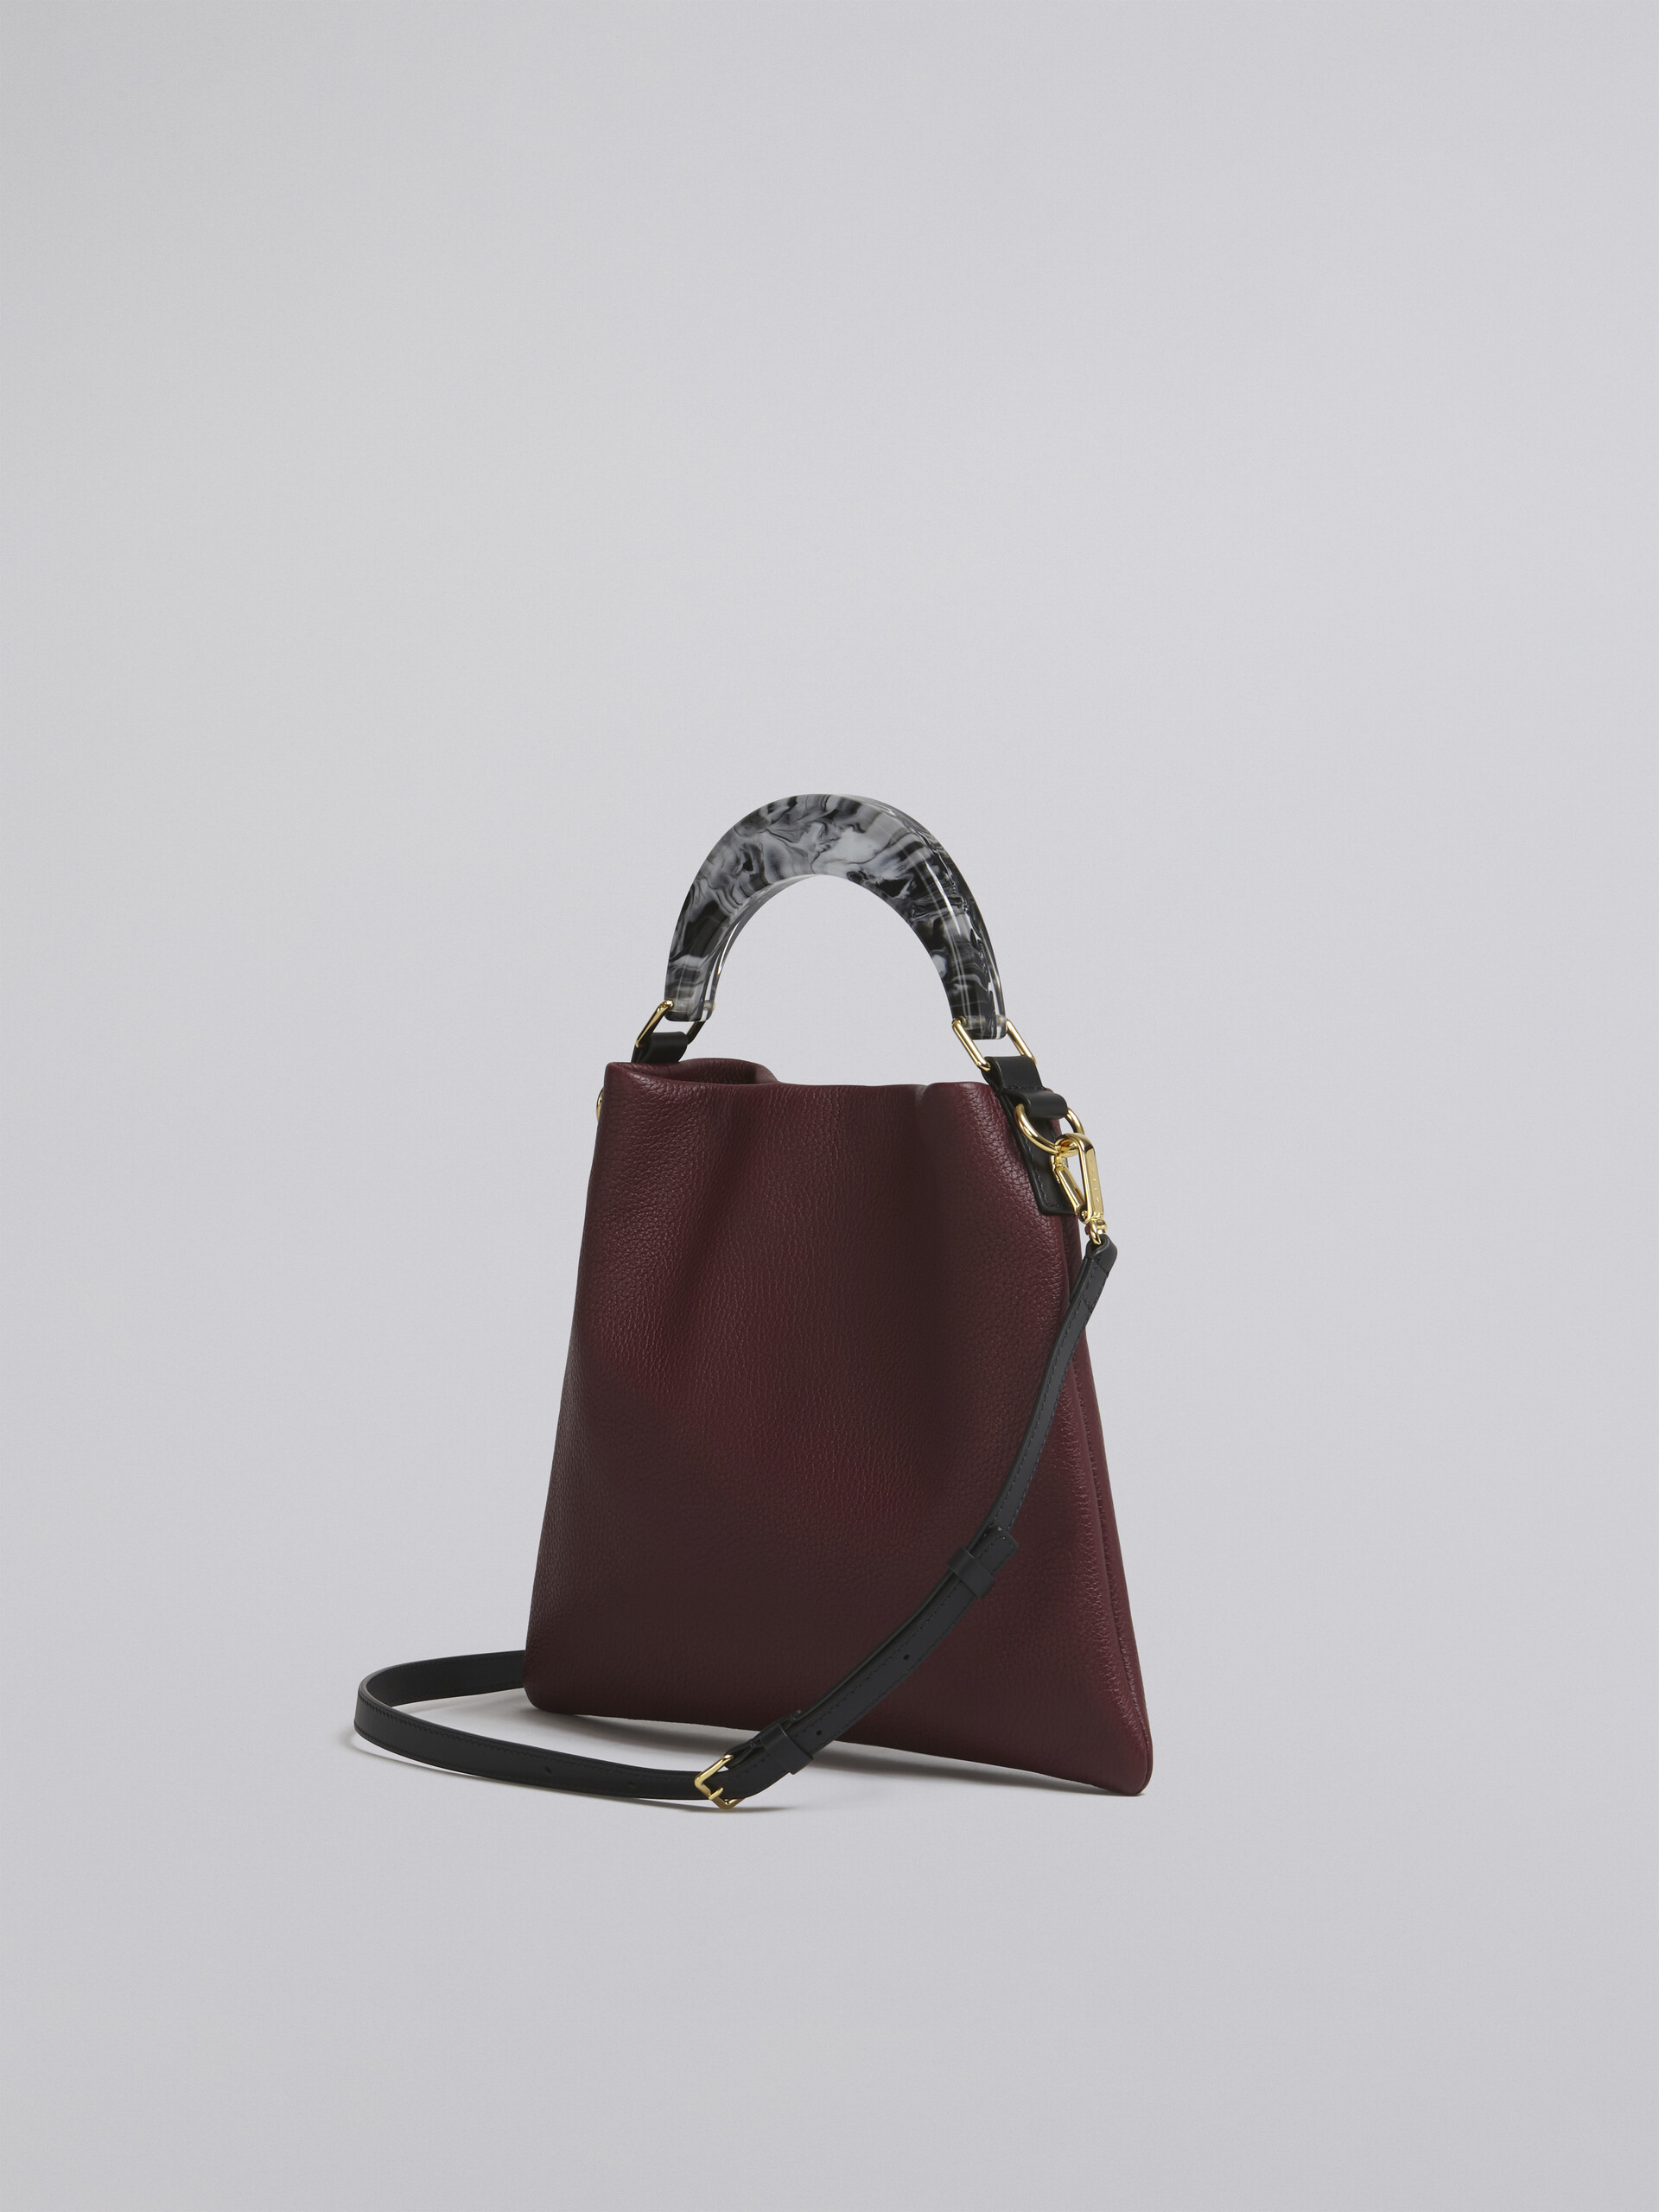 Venice small bag in red leather - Shoulder Bags - Image 2